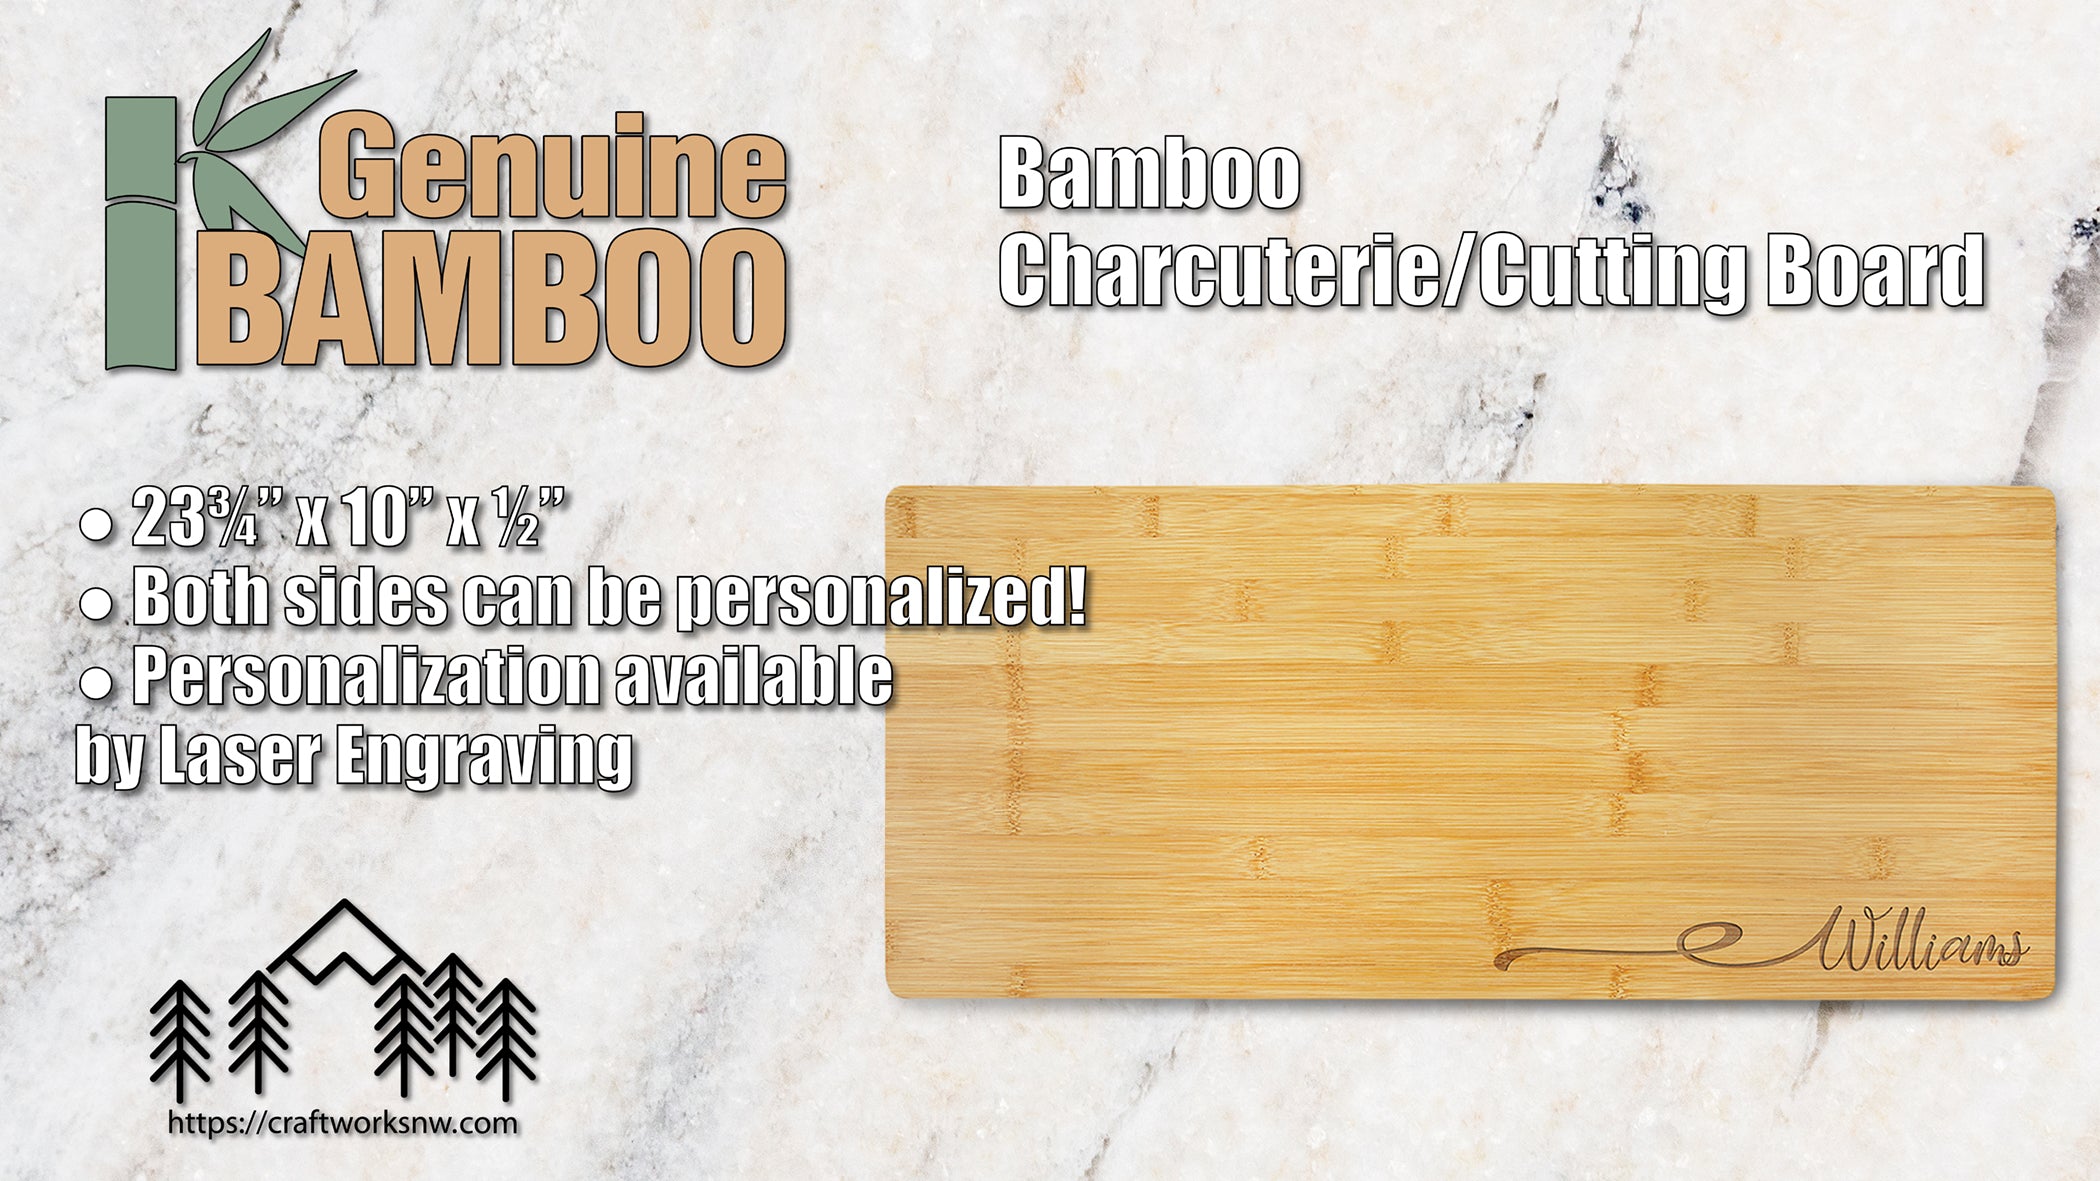 Bamboo Charcuterie Board/Cutting Board, 23-3/4" x 10", Laser Engraved - Craftworks NW, LLC